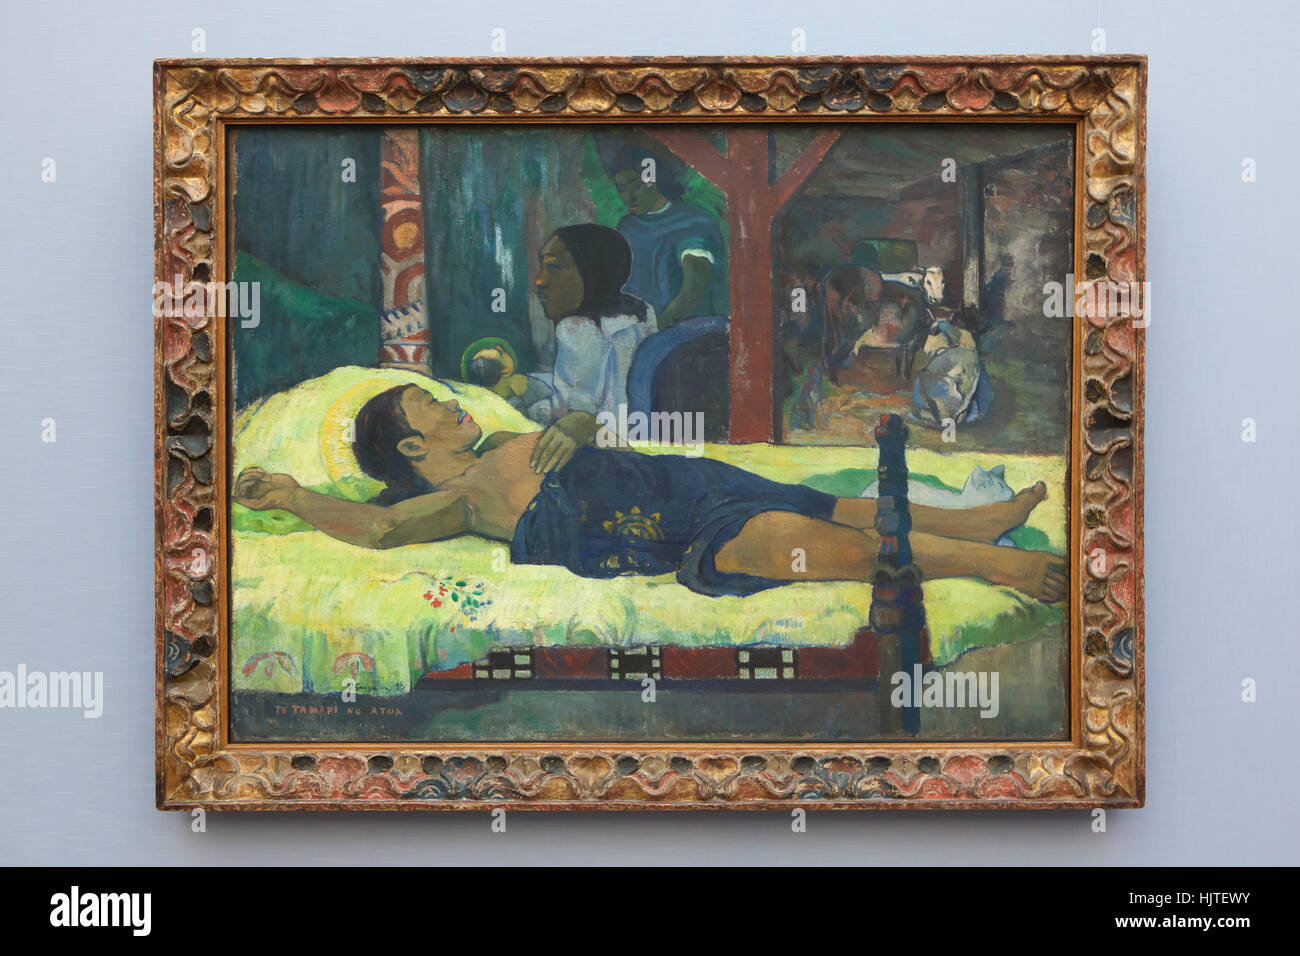 Painting Te tamari no atua (The Birth, 1896) by French post-impressionist painter Paul Gauguin on display in the Neue Pinakothek (New Pinacotheca) in Munich, Bavaria, Germany. Stock Photo